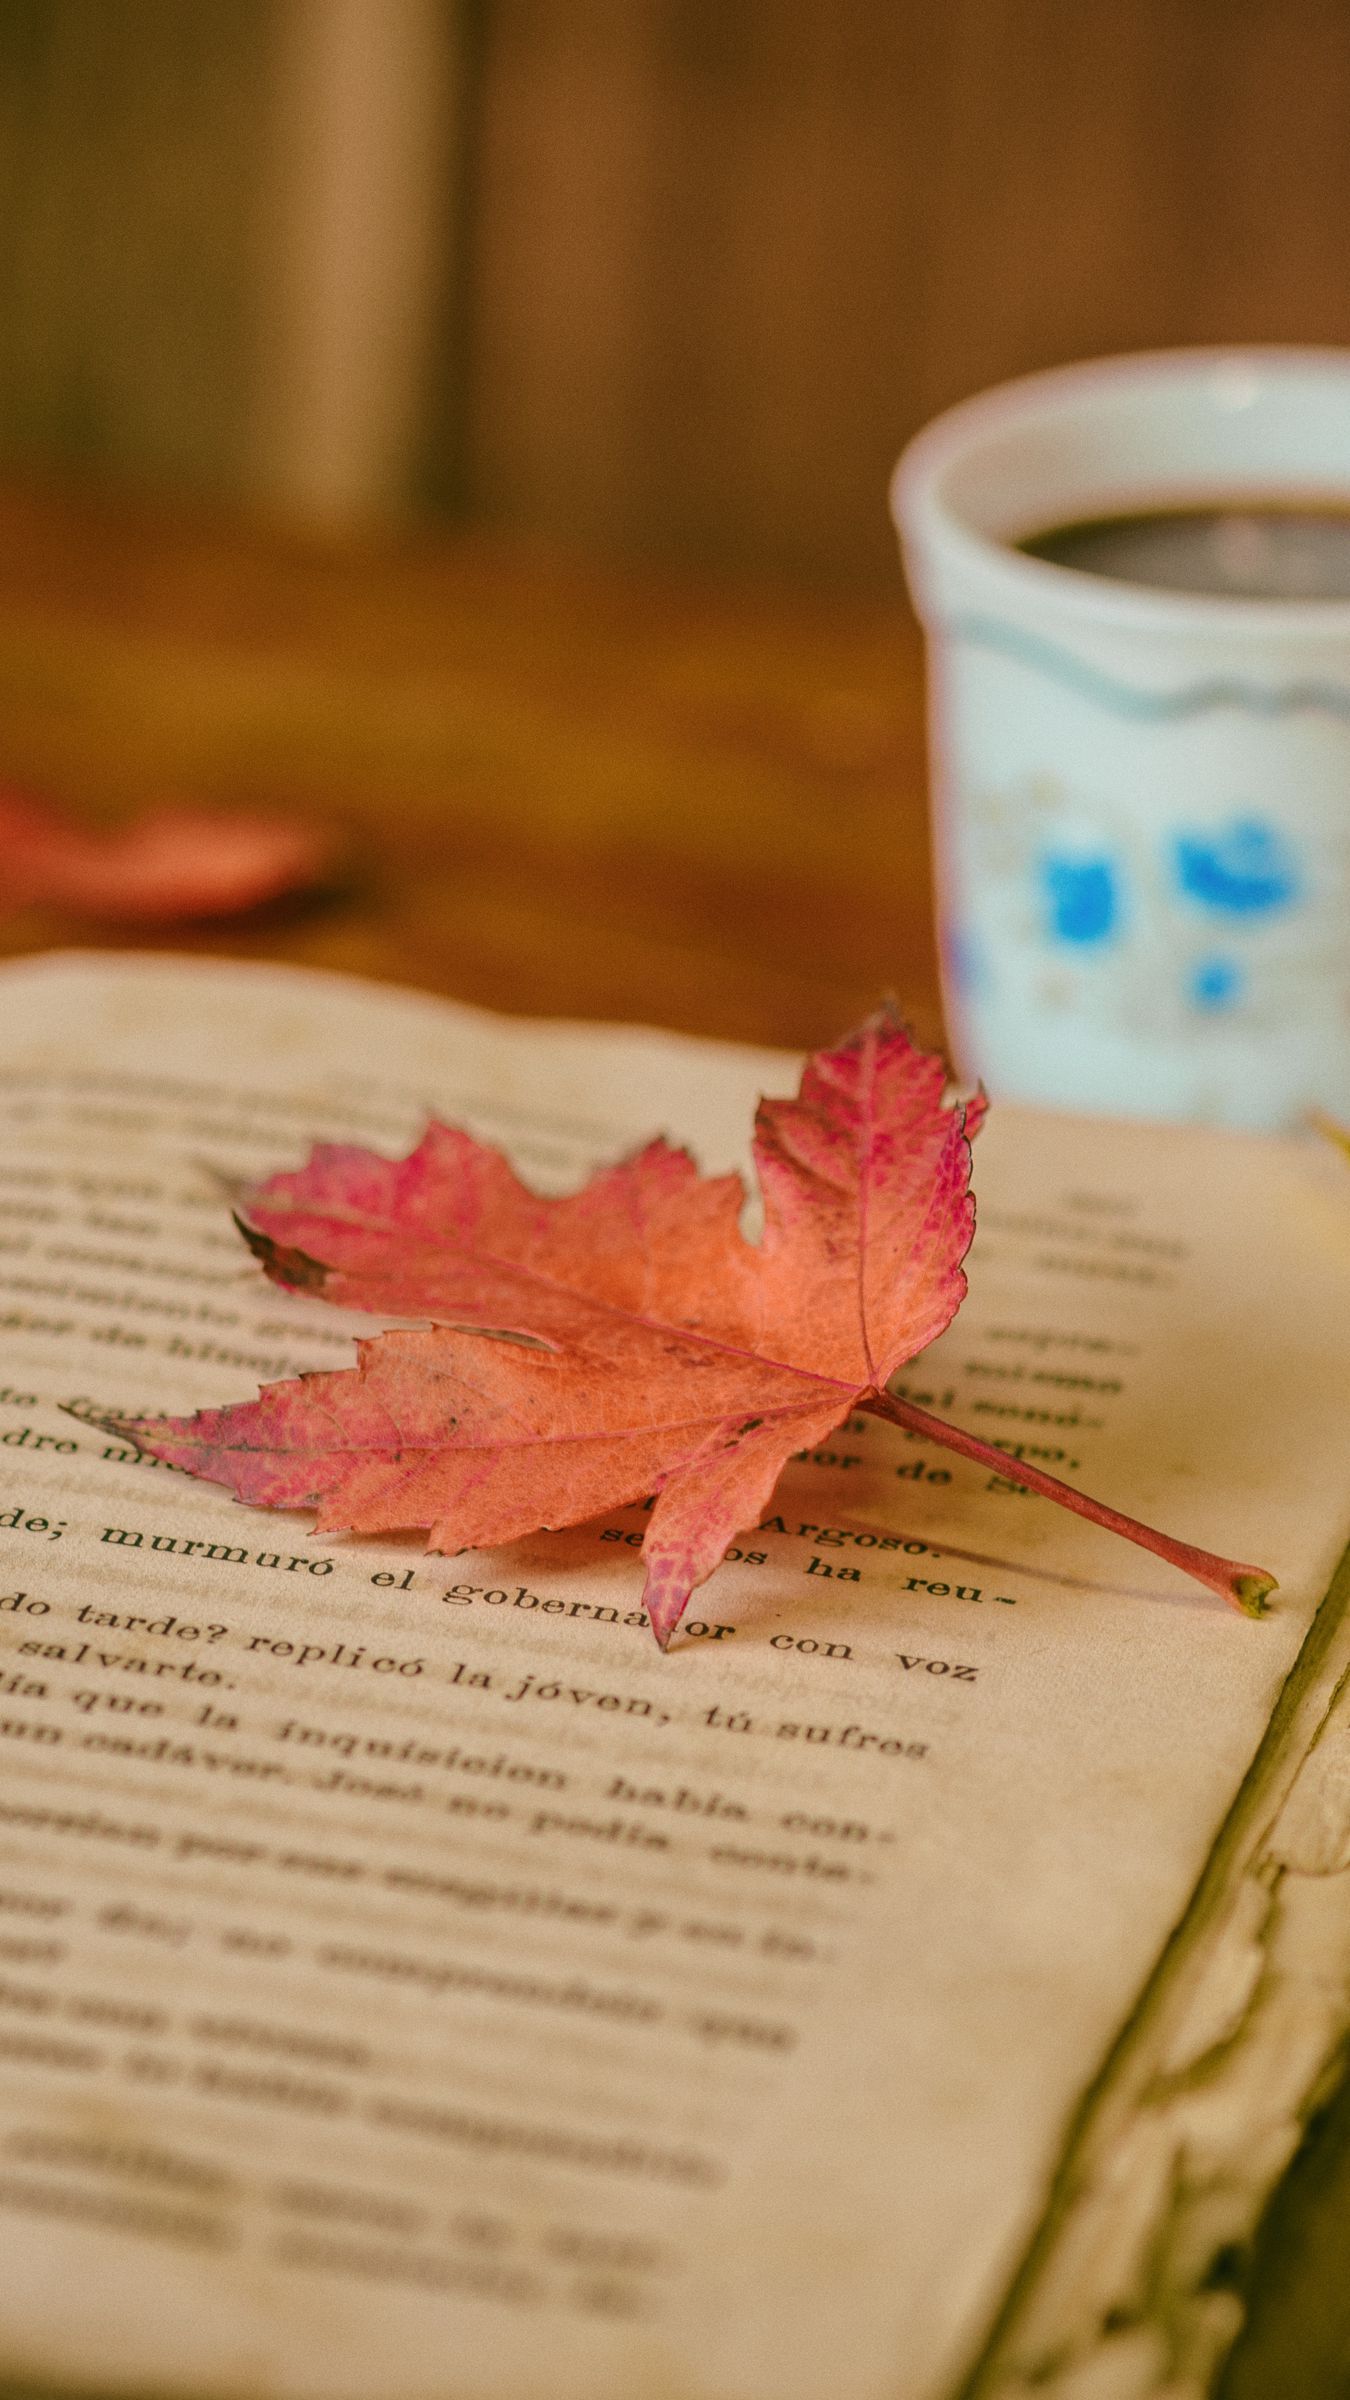 Download wallpaper 1350x2400 book, leaves, cup, autumn, comfort, reading, coffee iphone 8+/7+/6s+/for parallax HD background